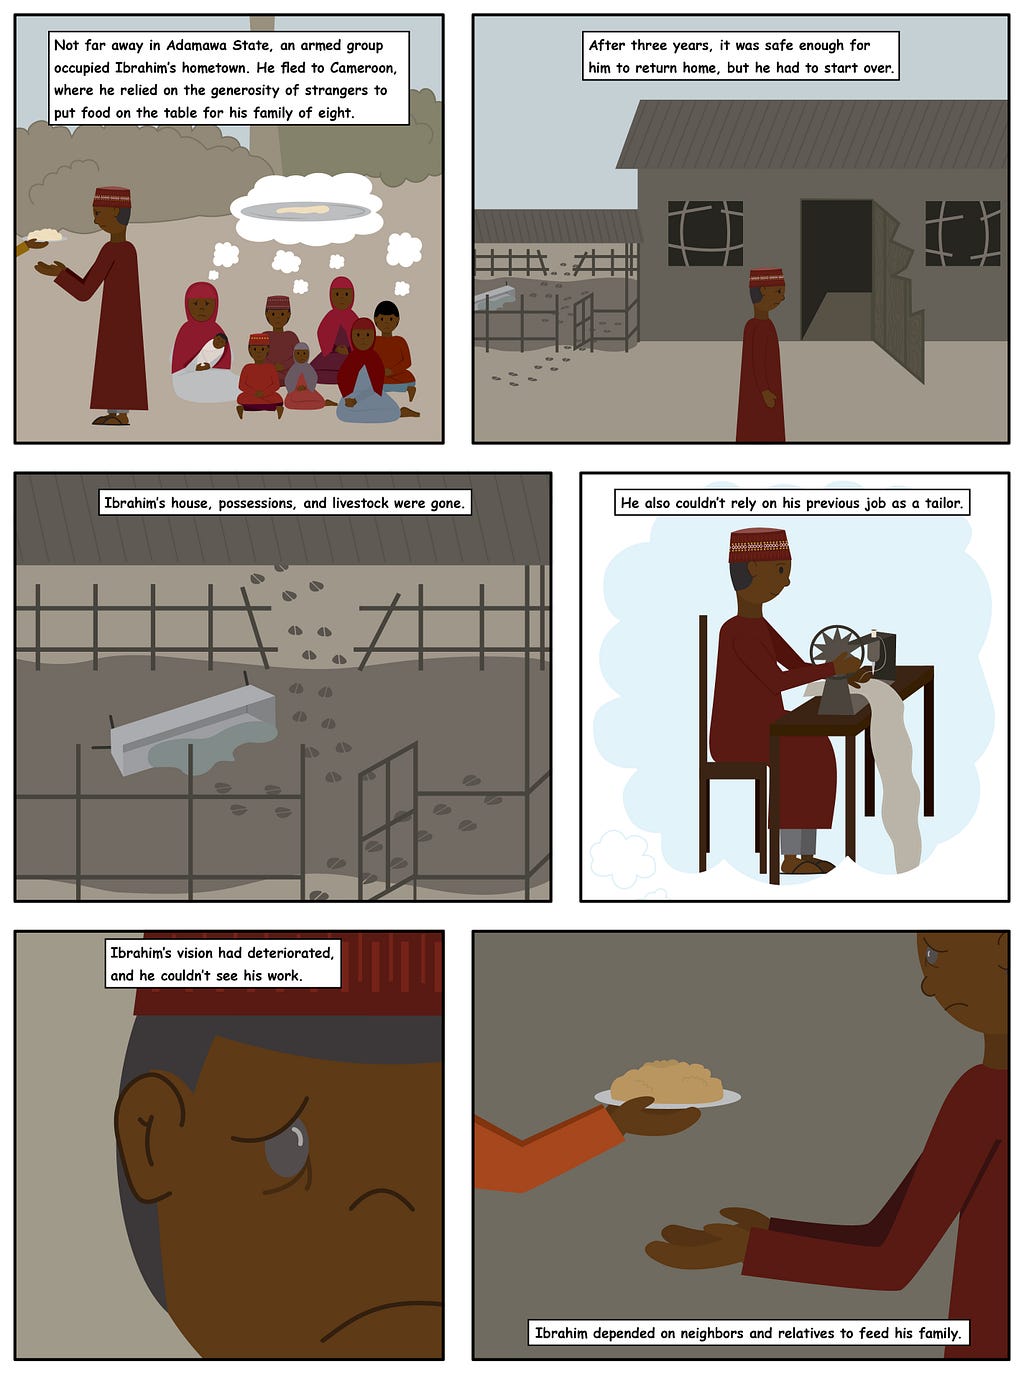 Illustrated story of Ibrahim, displaced to Cameroon for three years. When he returned, his home and belongings were gone.